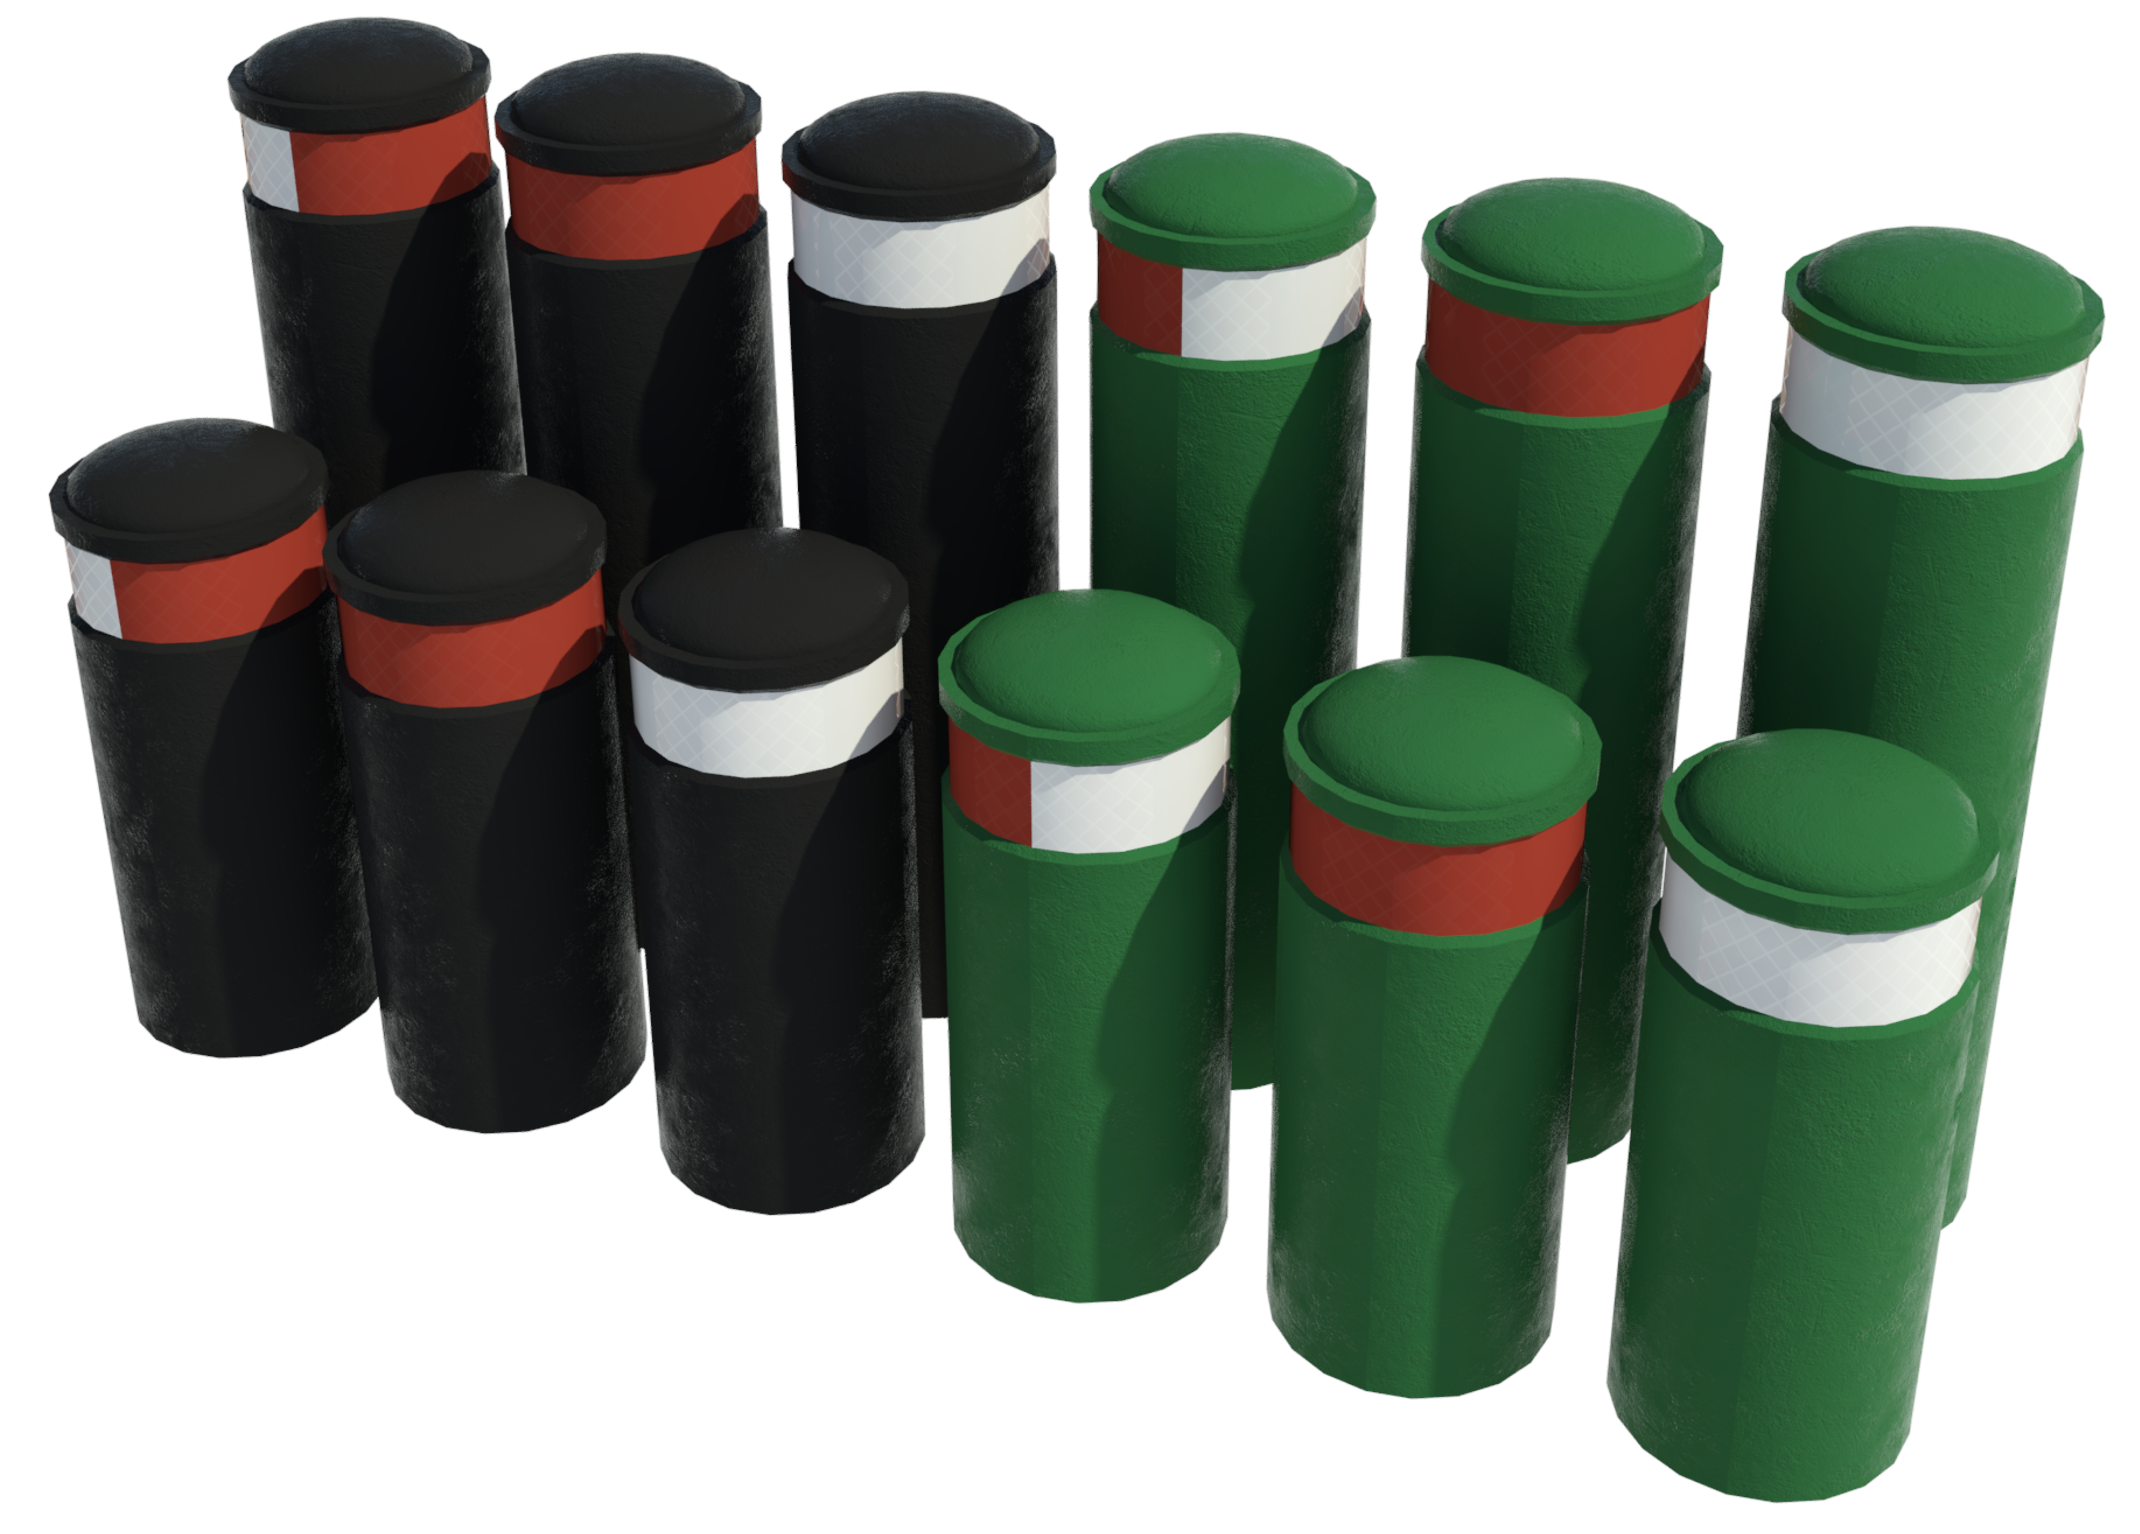 Revit render showing rubber bollards made from recycled materials.